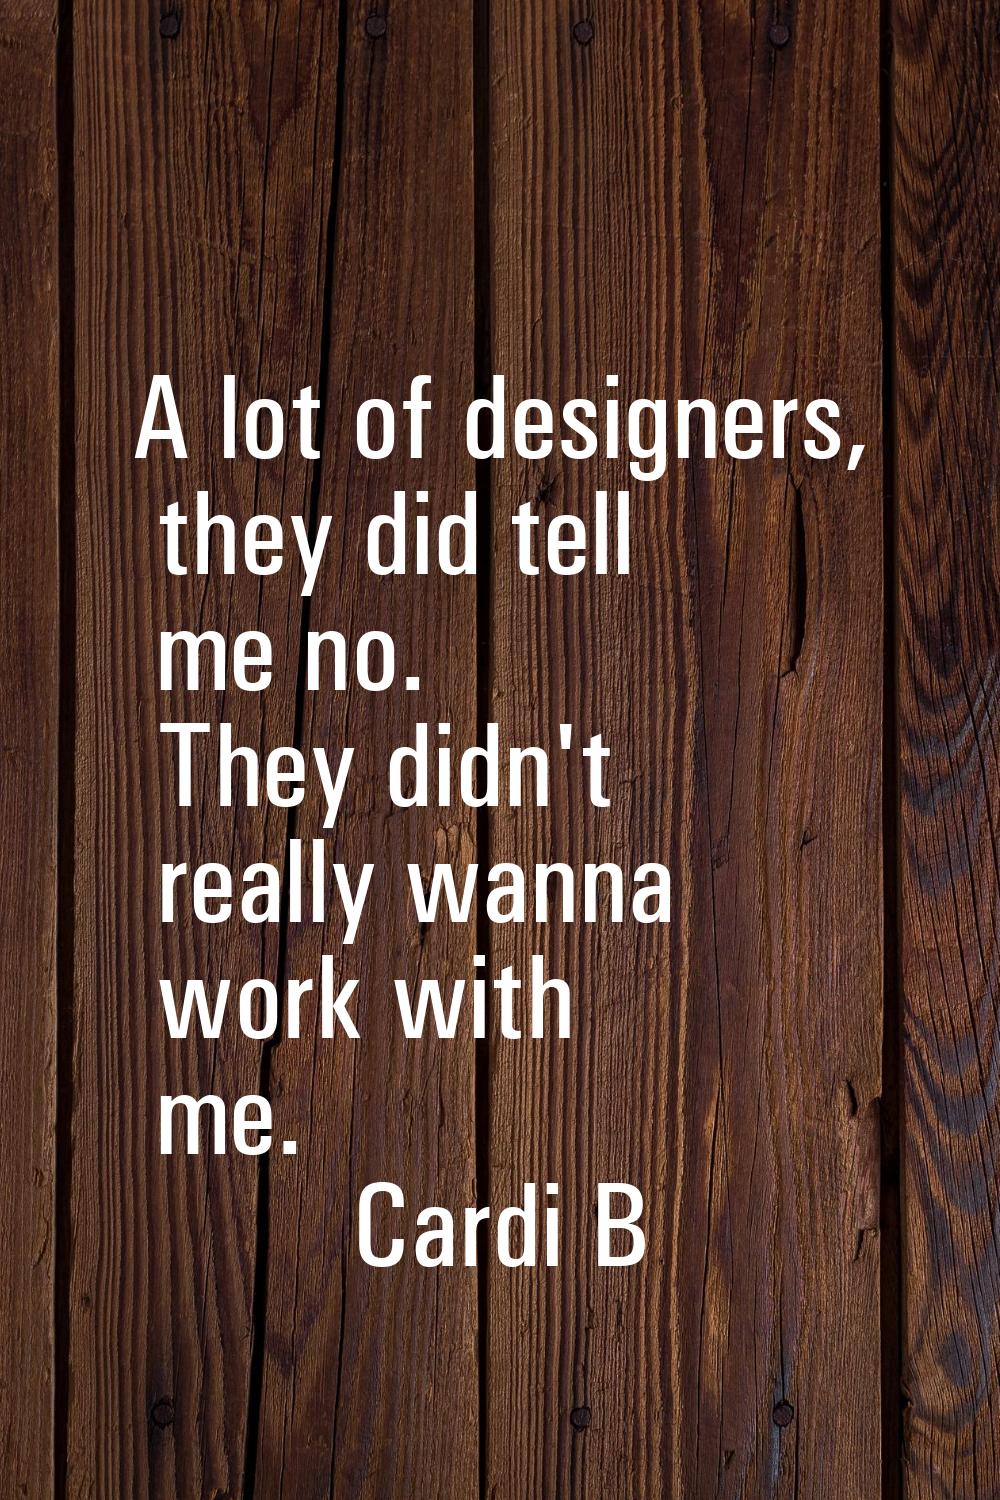 A lot of designers, they did tell me no. They didn't really wanna work with me.